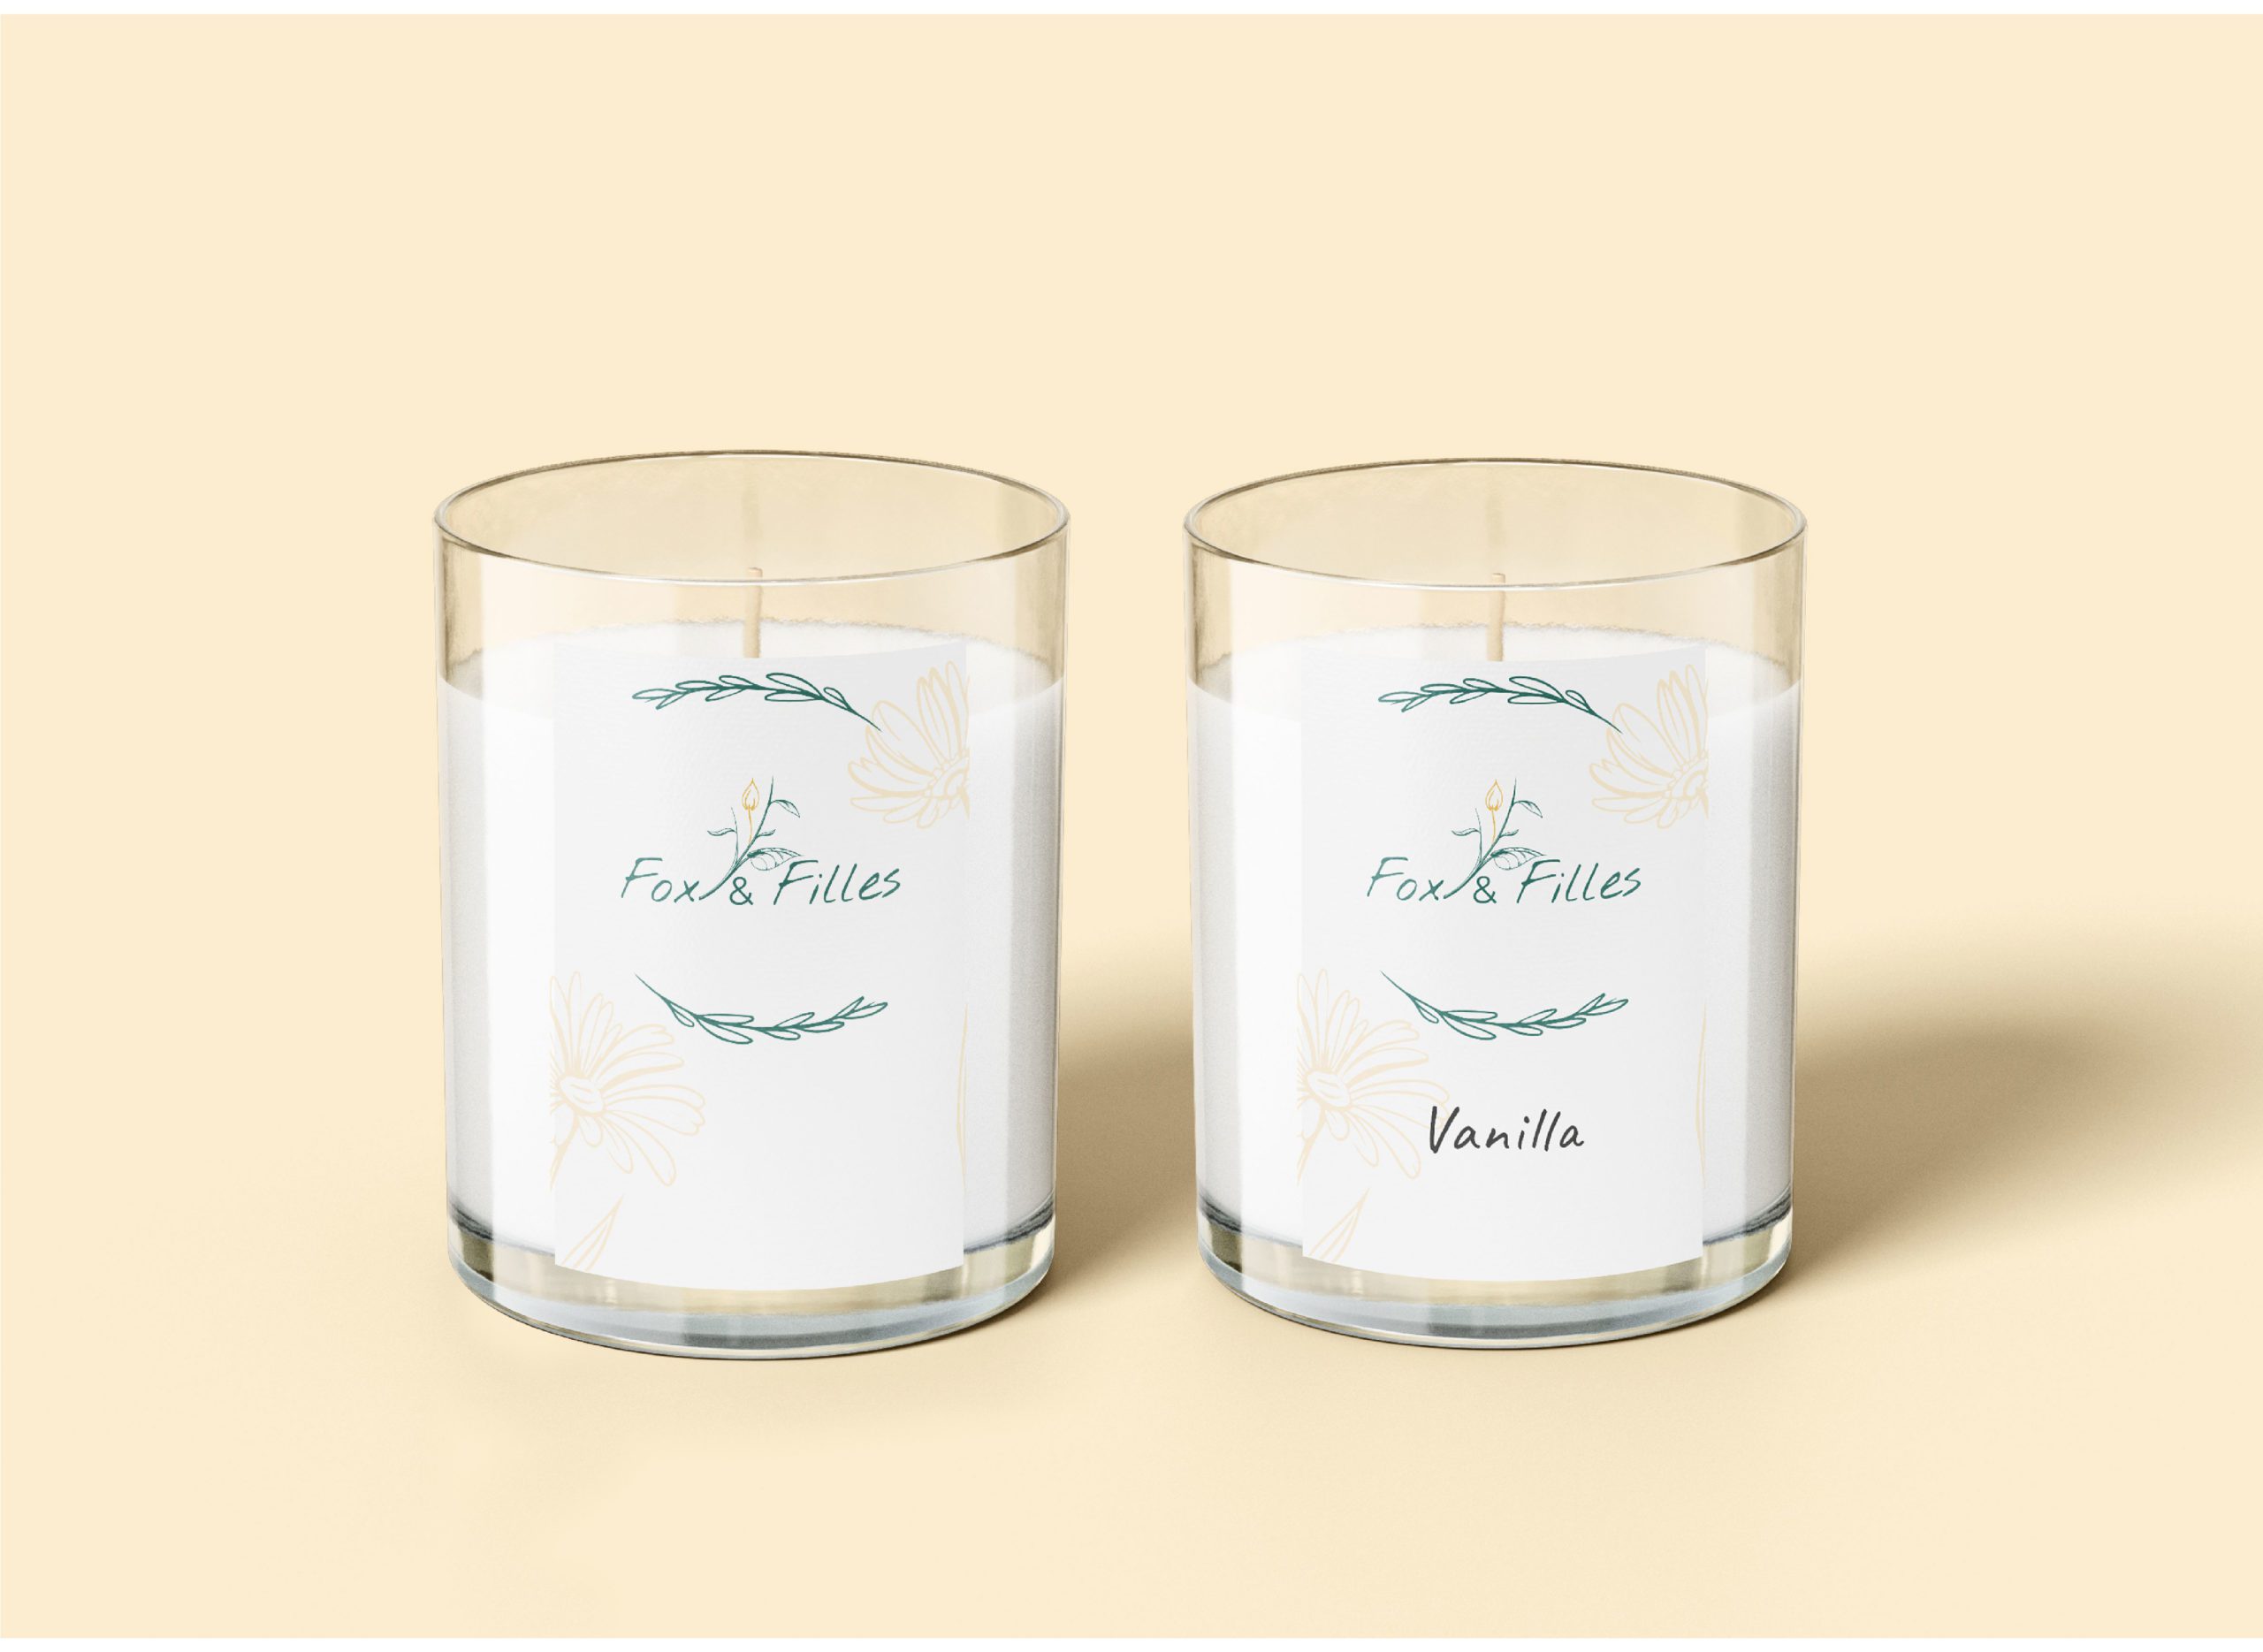 Candle labels on a mock up